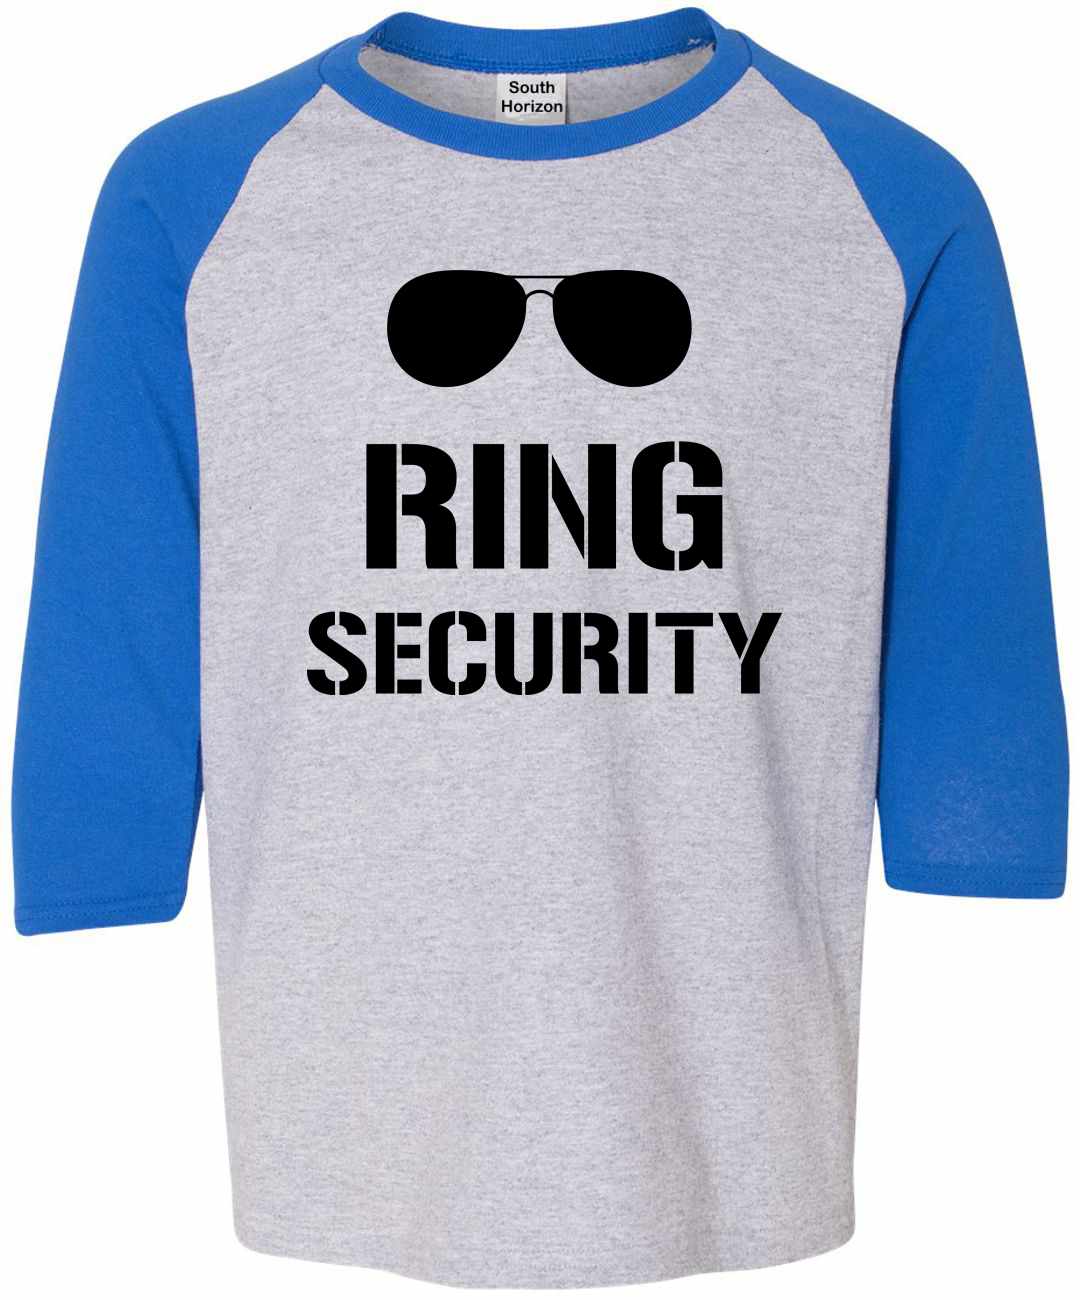 Ring Security on Youth Baseball Shirt